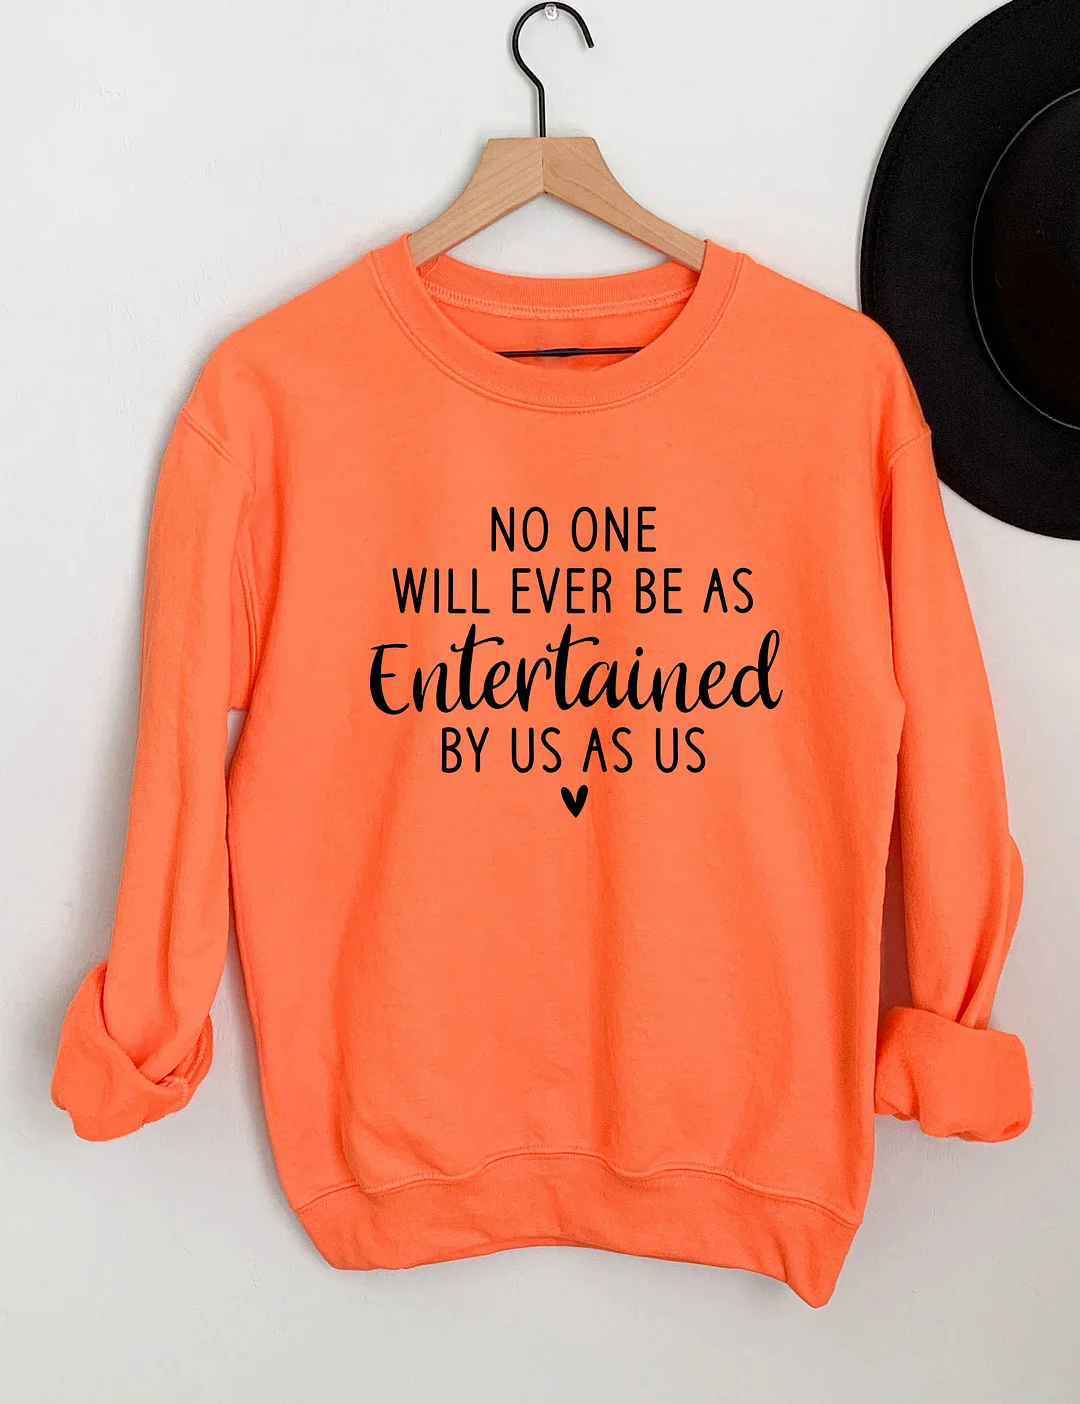 No One Will Ever Be As Entertained By Us As Us Sweatshirt